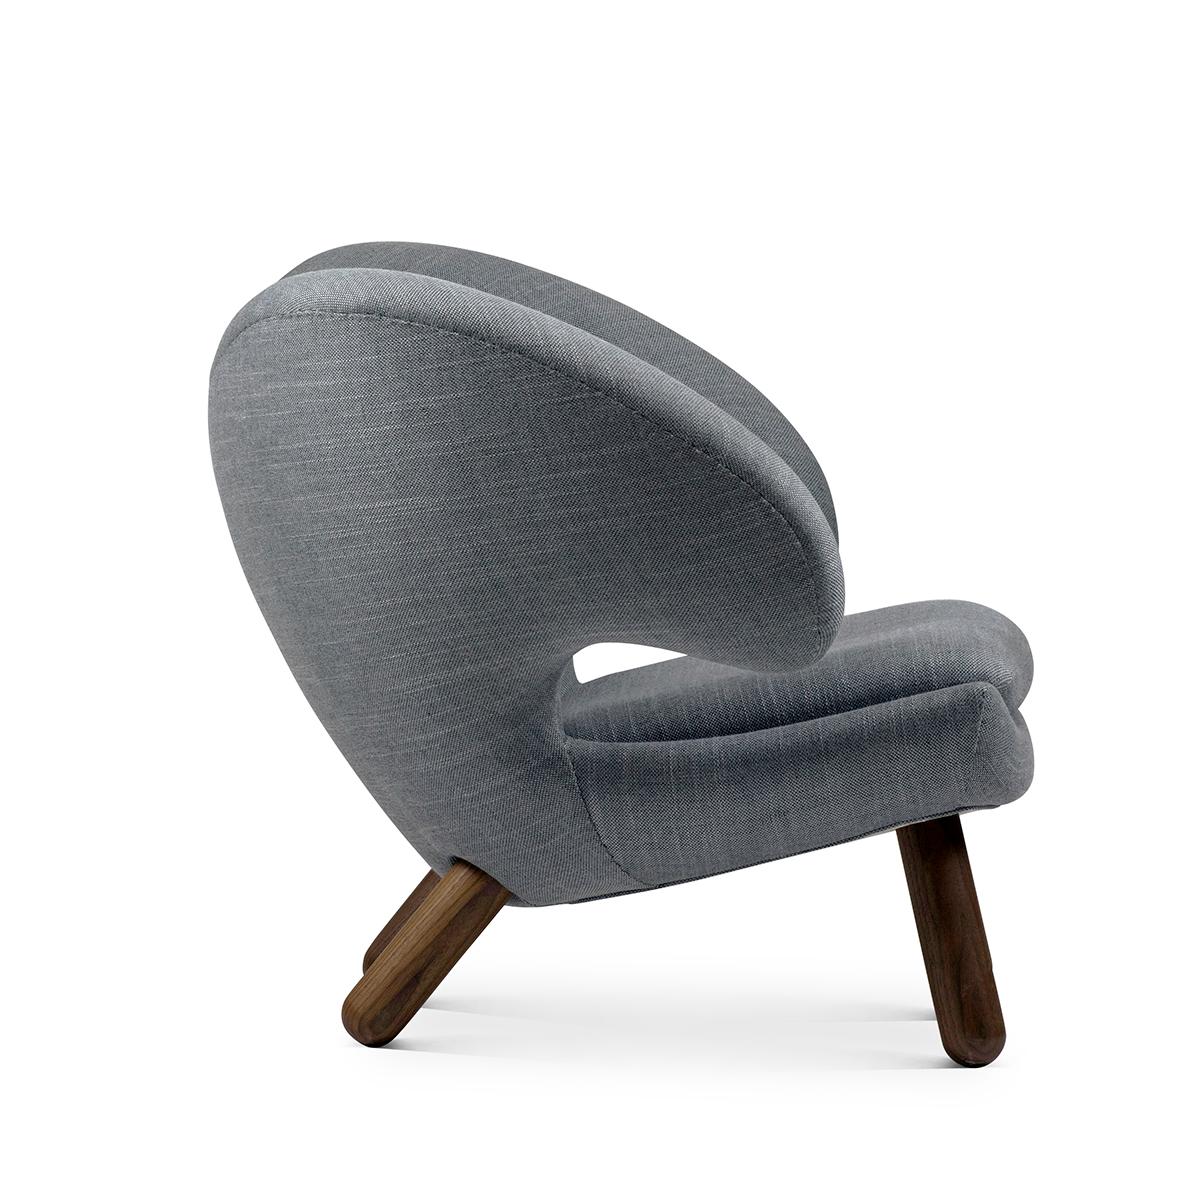 Contemporary Finn Juhl Pelican Chair Fabric with Buttons and Wood